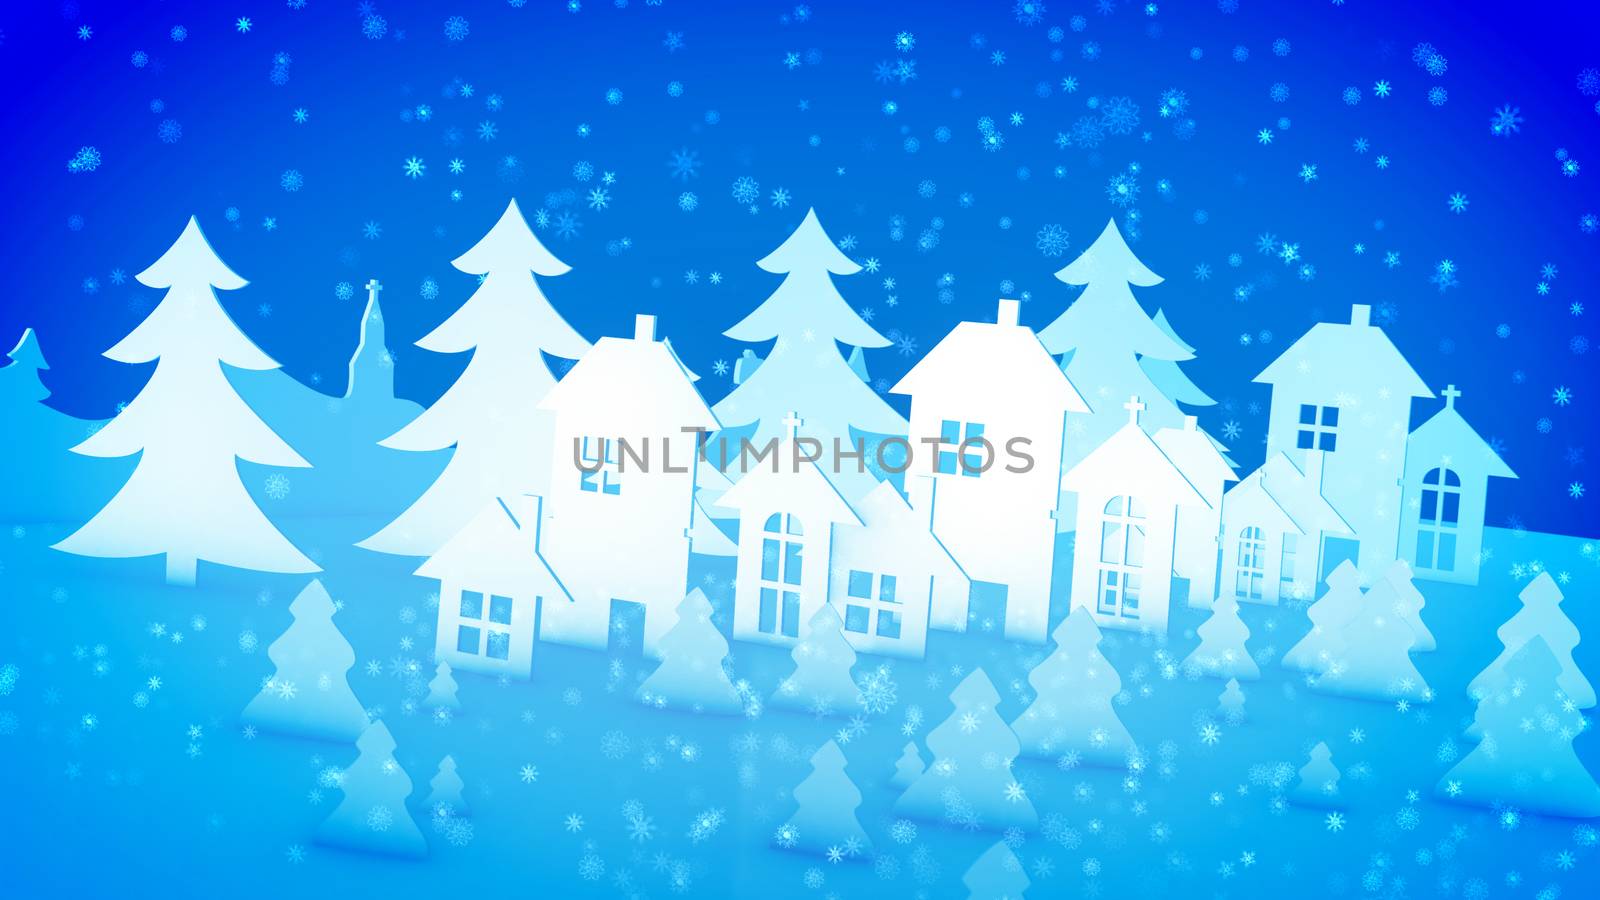 Christmas paper buildings under white snowflakes by klss